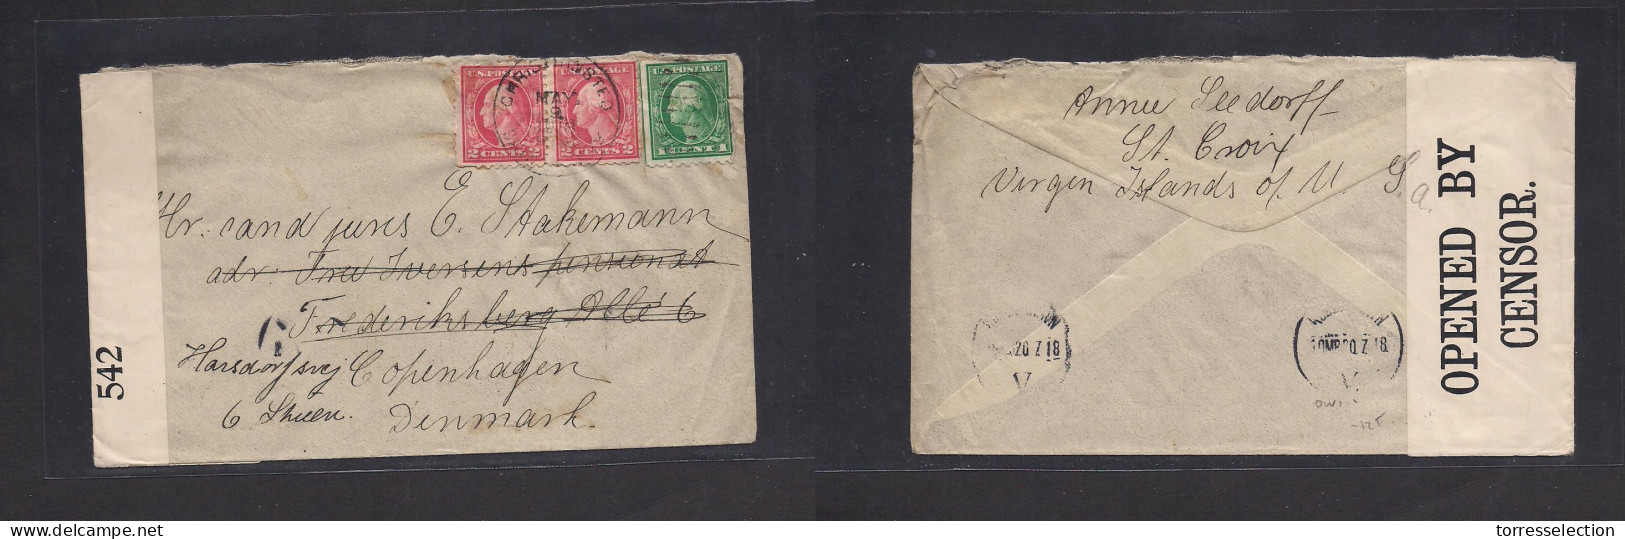 D.W.I.. 1918 (9 May) Christiansted - Denmark (20 July 18) Cph. Multifkd US WWI Censored Envelope. Fine. - Antille